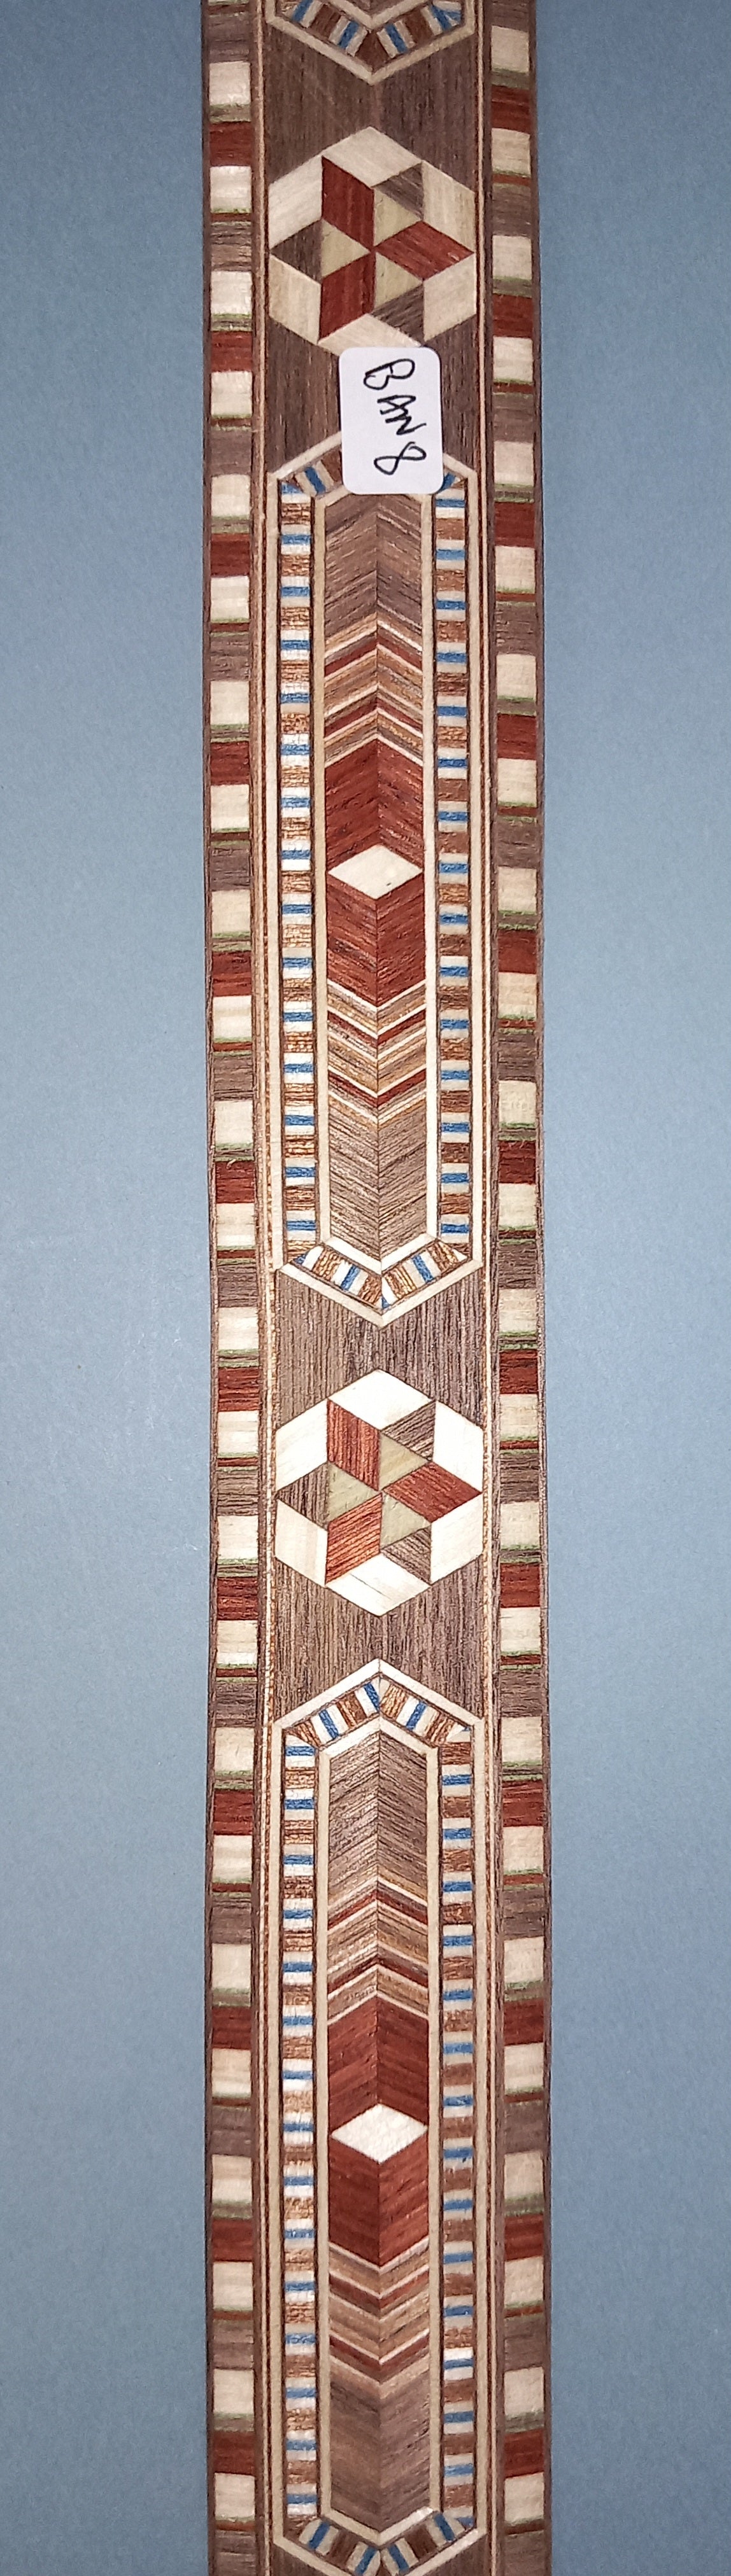 MARQUETRY INLAY BANDINGS 0.5MM THICK    40 X 100 CM